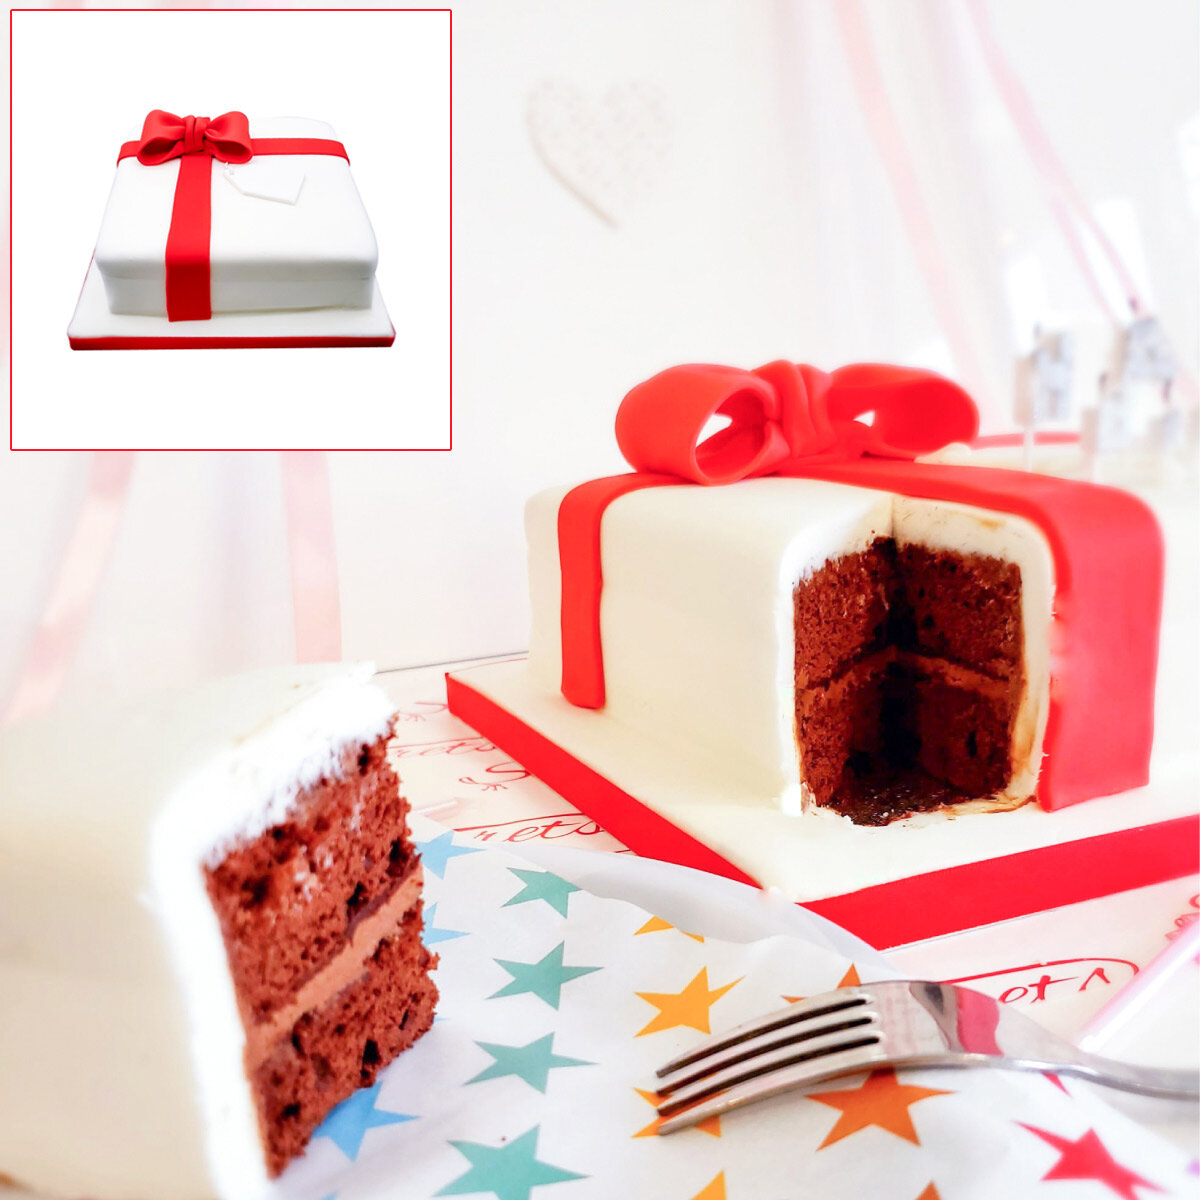 New Cakes Present Box Cake in 3 Flavours, 1.95kg